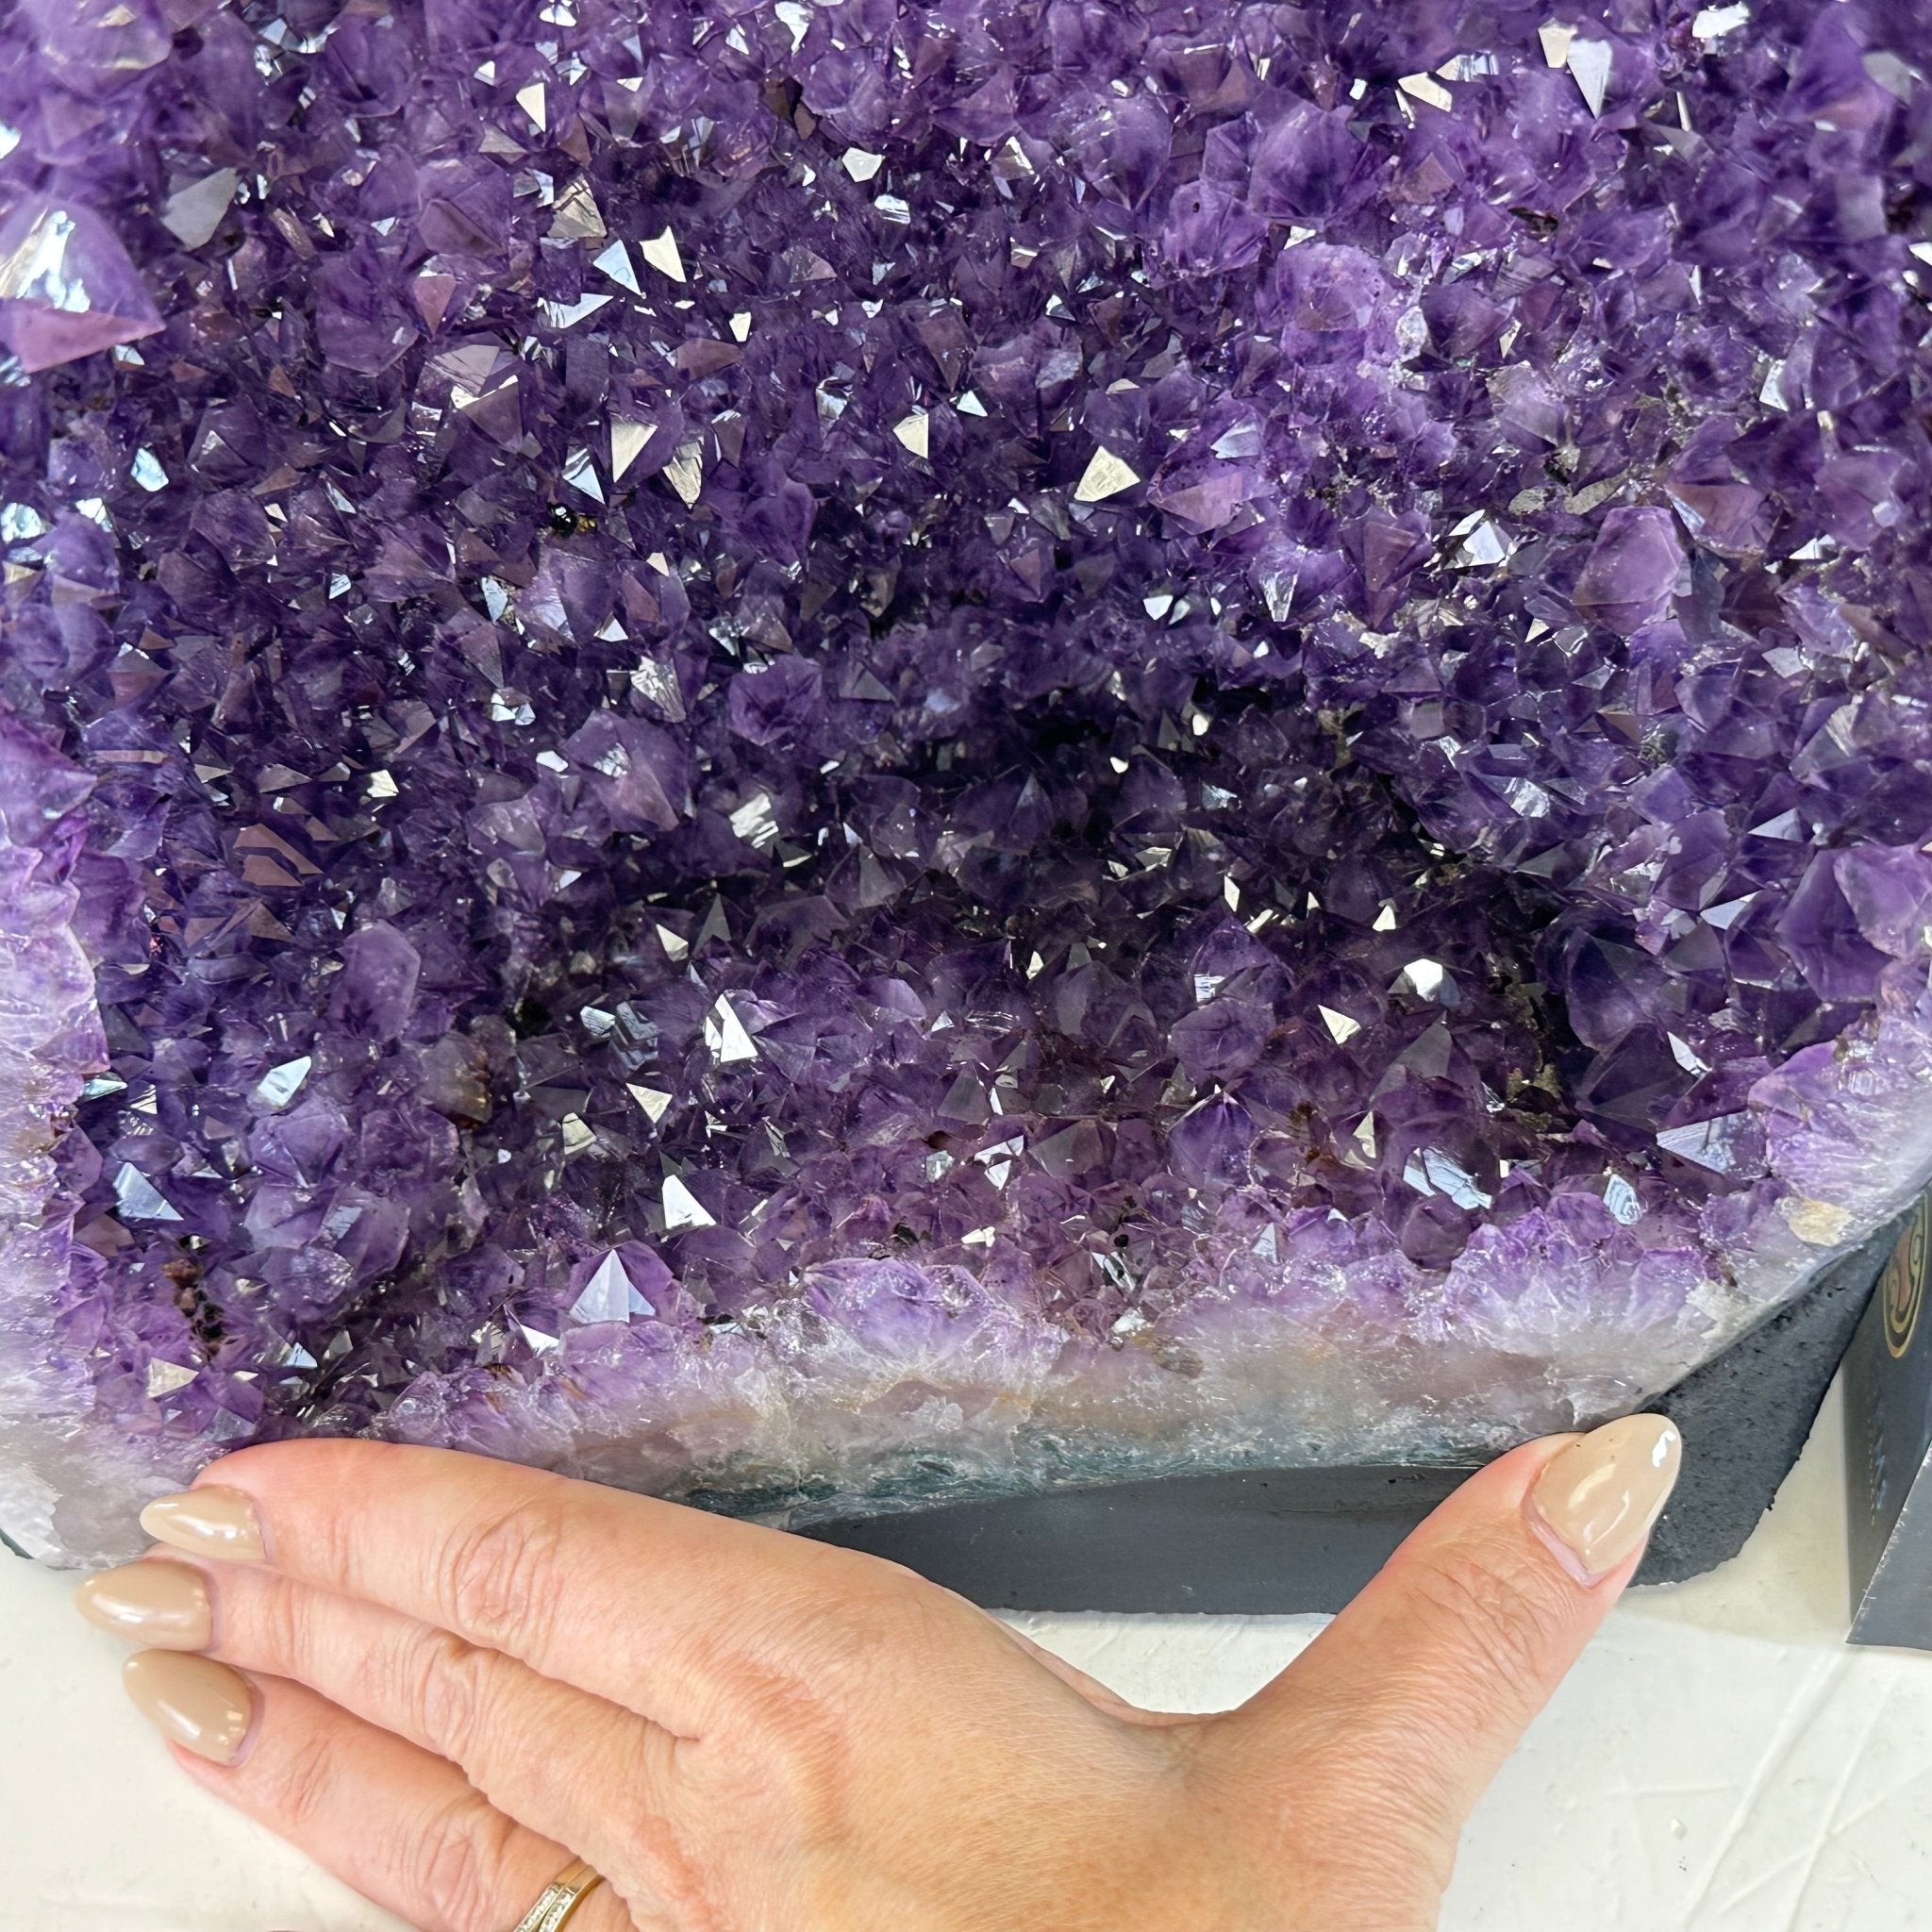 Quality Brazilian Amethyst Cathedral, 28.1 lbs & 15.1" Tall, #5601 - 1399 - Brazil GemsBrazil GemsQuality Brazilian Amethyst Cathedral, 28.1 lbs & 15.1" Tall, #5601 - 1399Cathedrals5601 - 1399